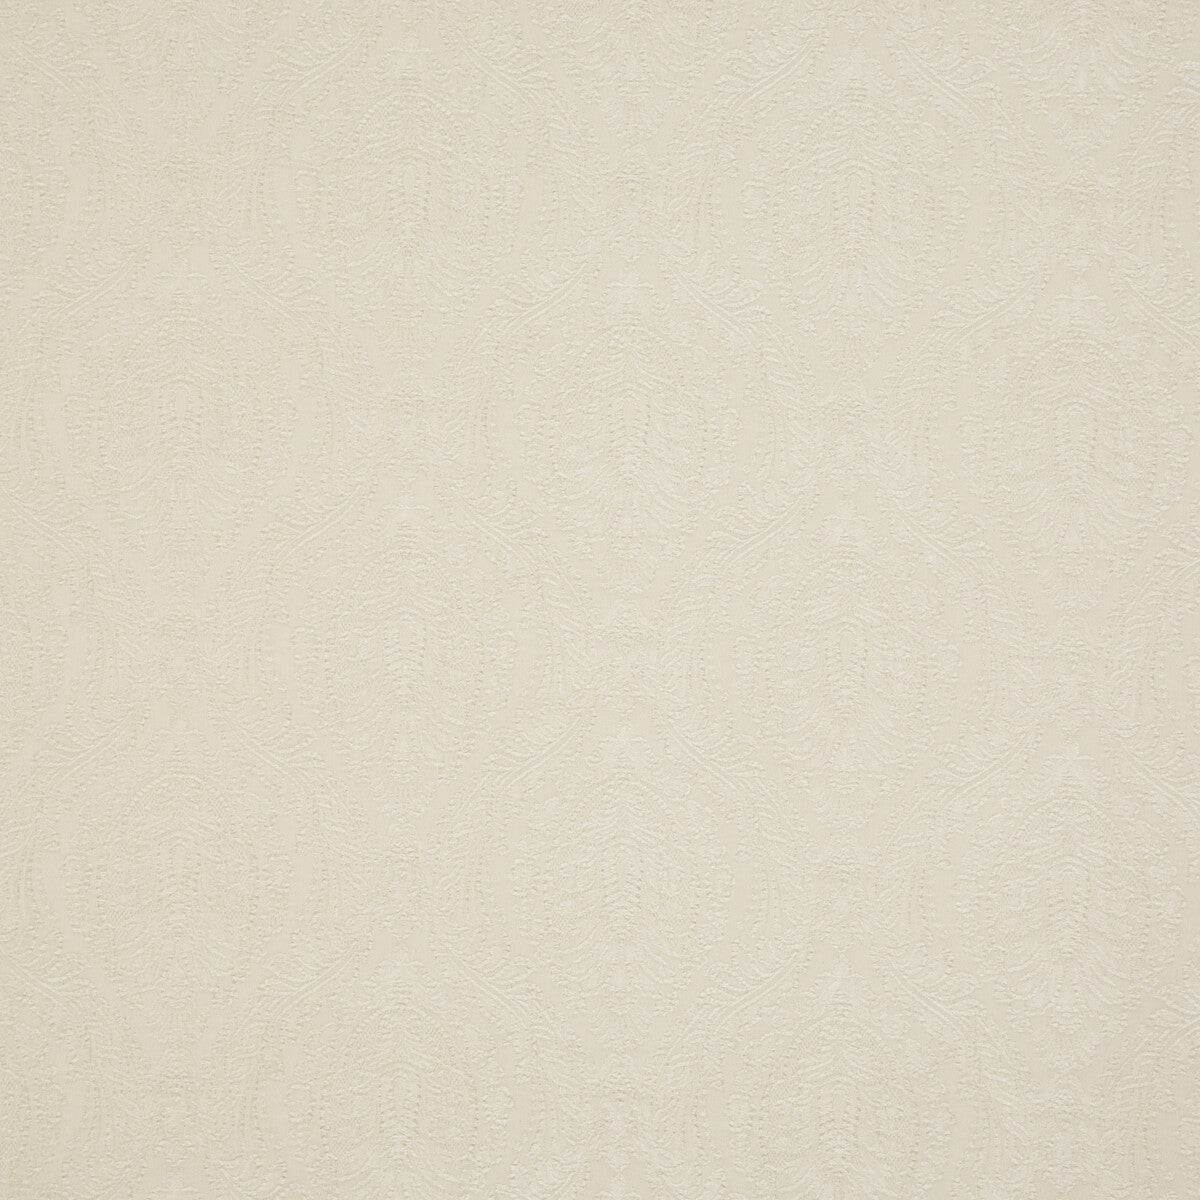 Pentire fabric in cream color - pattern BF10569.120.0 - by G P &amp; J Baker in the Artisan collection